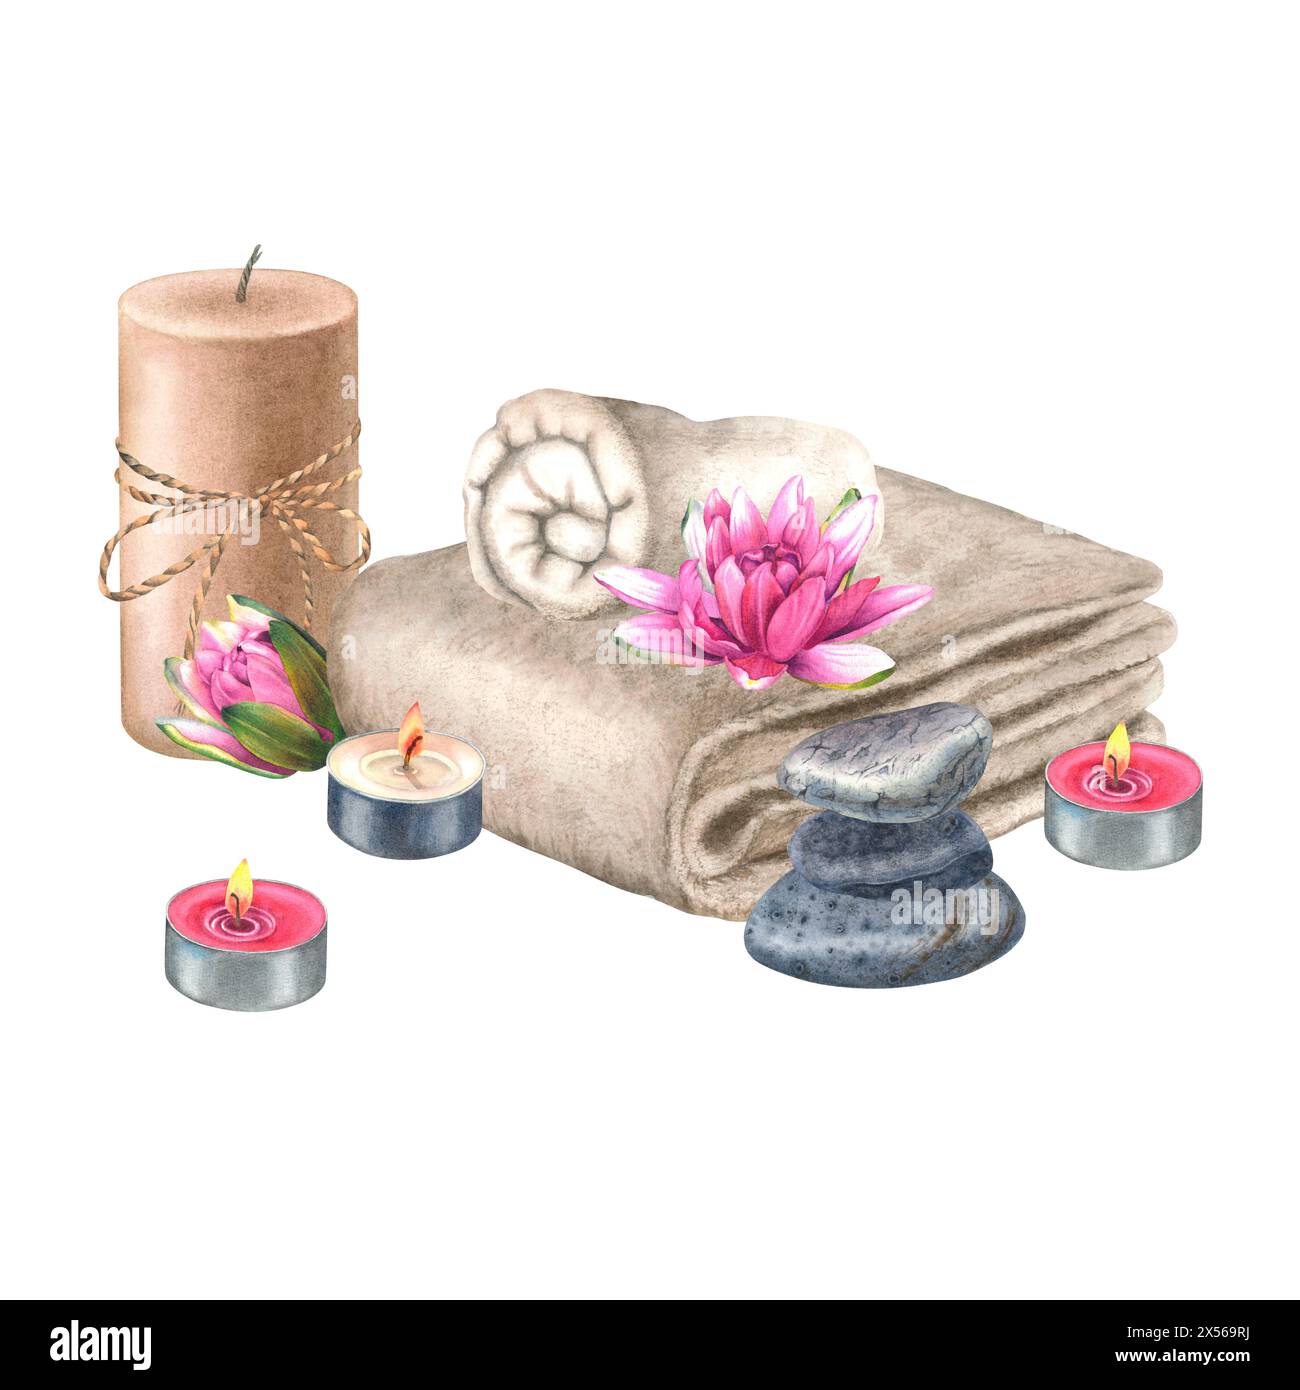 Neatly rolled up terry towel, pillar soy wax candle with jute rope bow, tea light candles, pyramid of balancing stones, water lily flower. Hand drawn Stock Photo